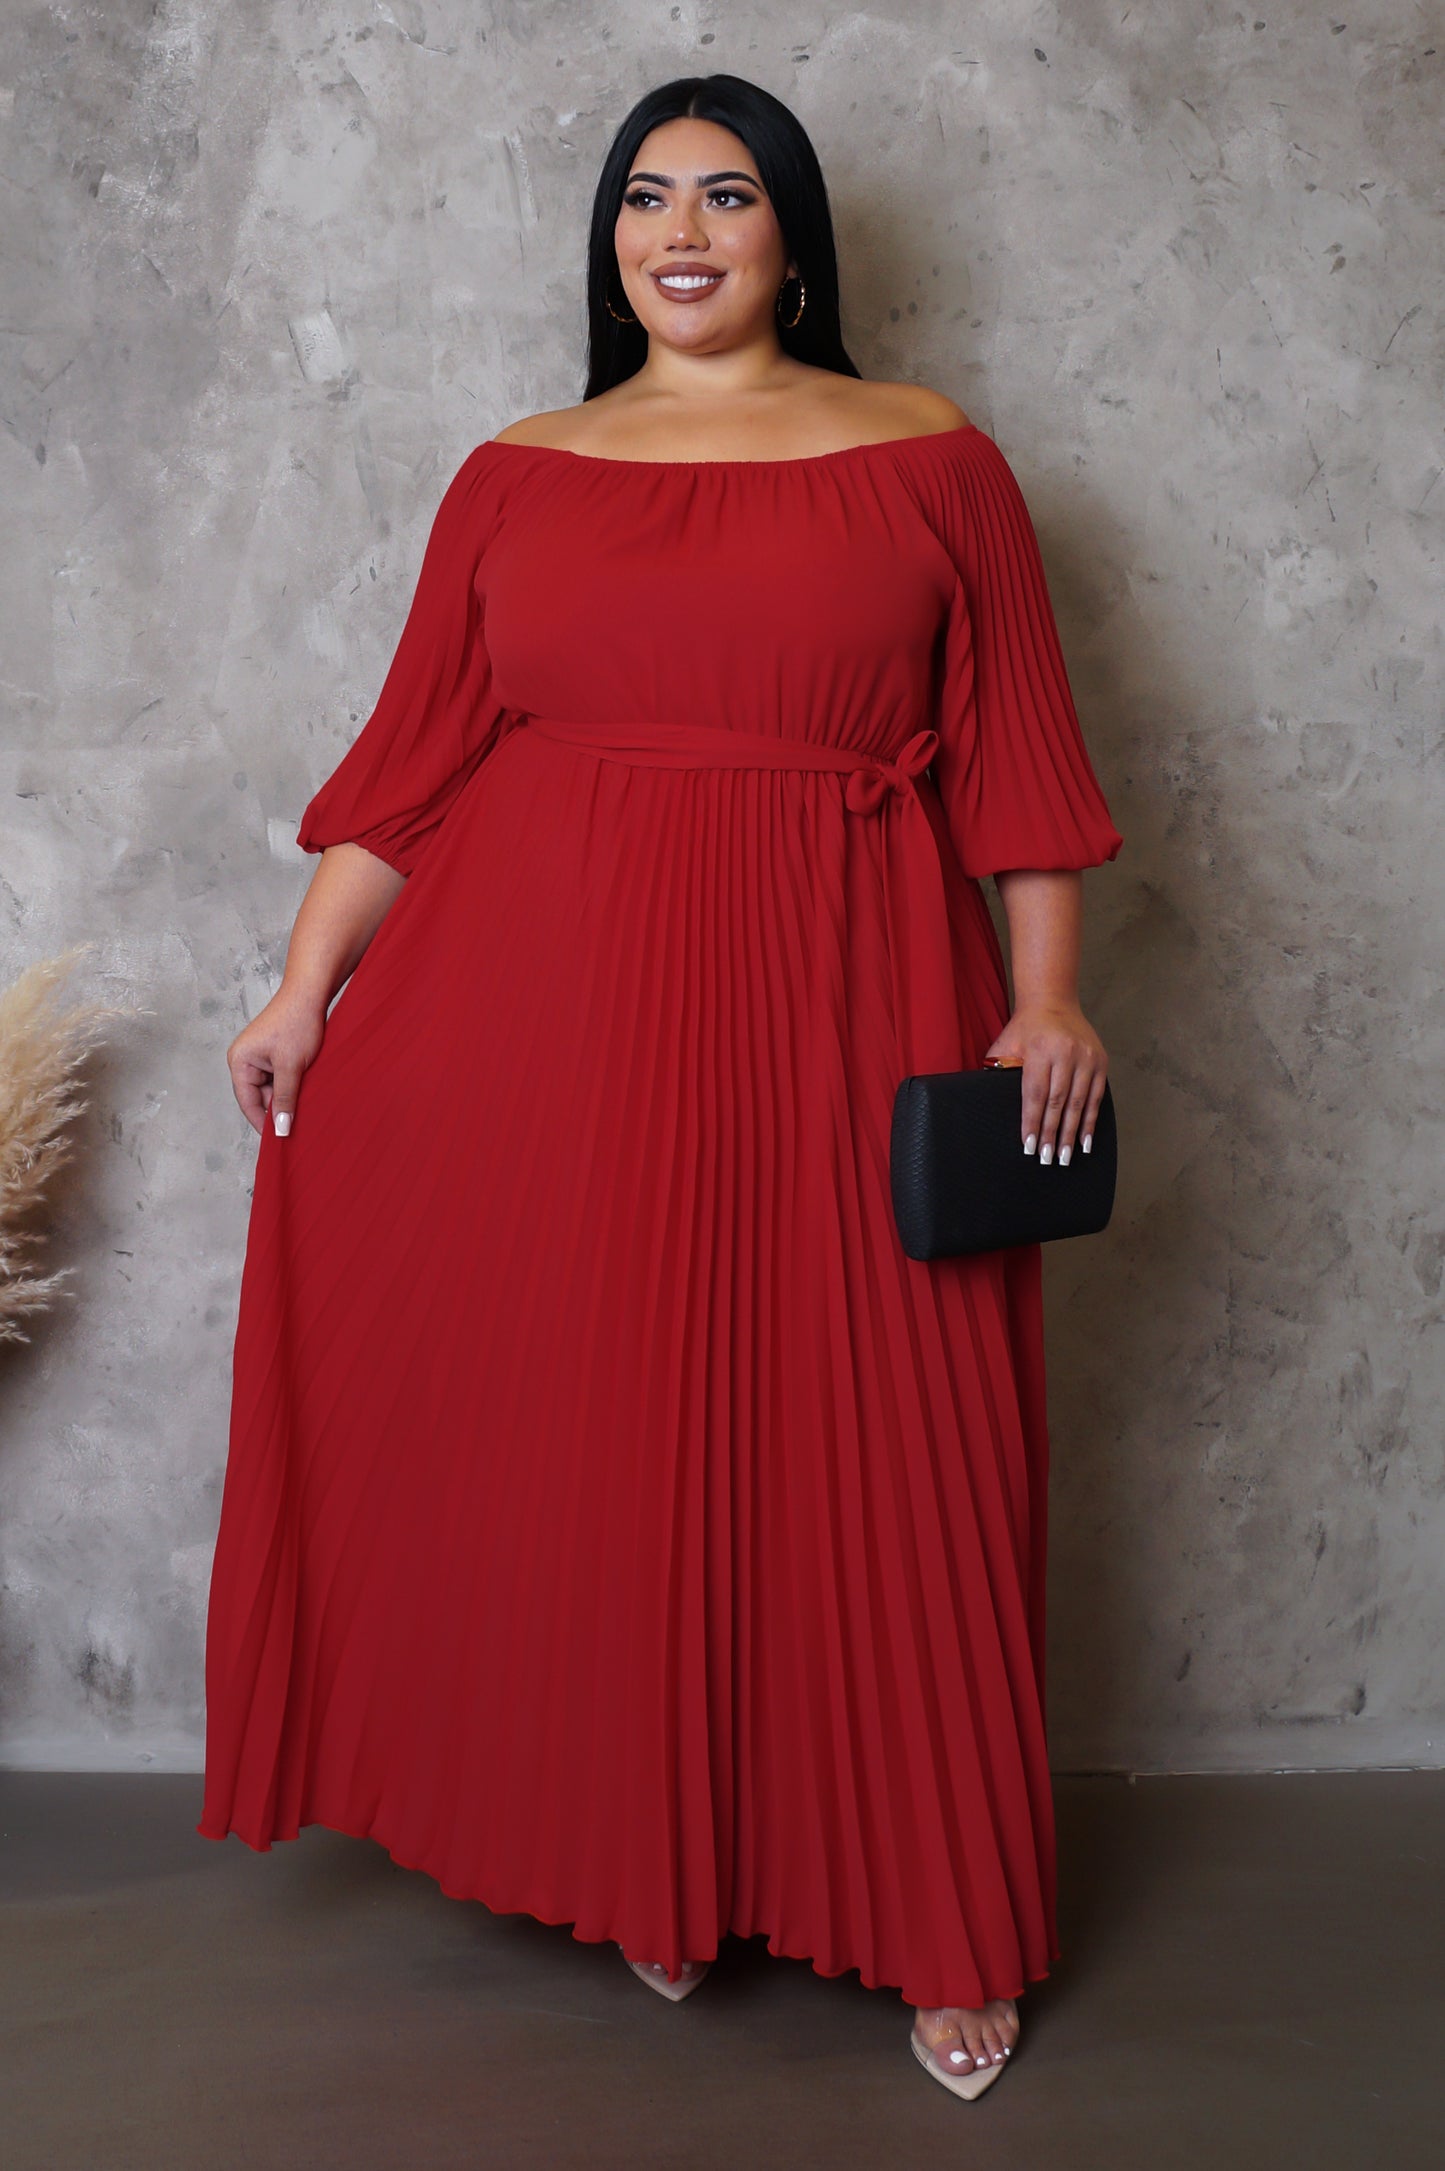 Ready To Go Out Maxi Dress Plus Size - Red